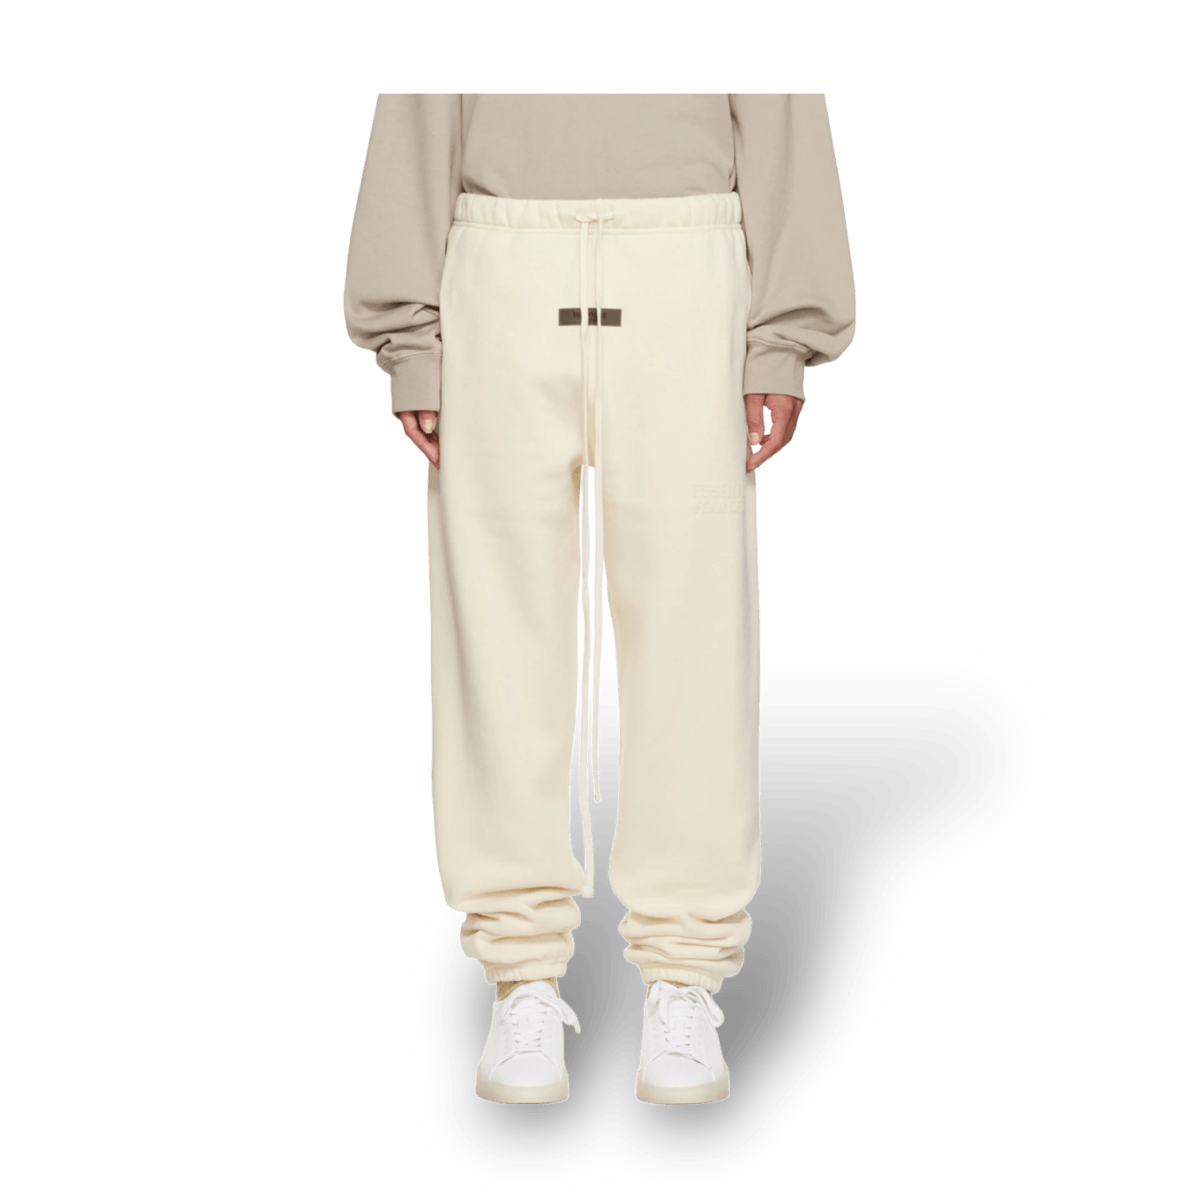 Essentials Fear of God Tapered Cream Sweat Pants - Bottoms - Essentials - Jawns on Fire